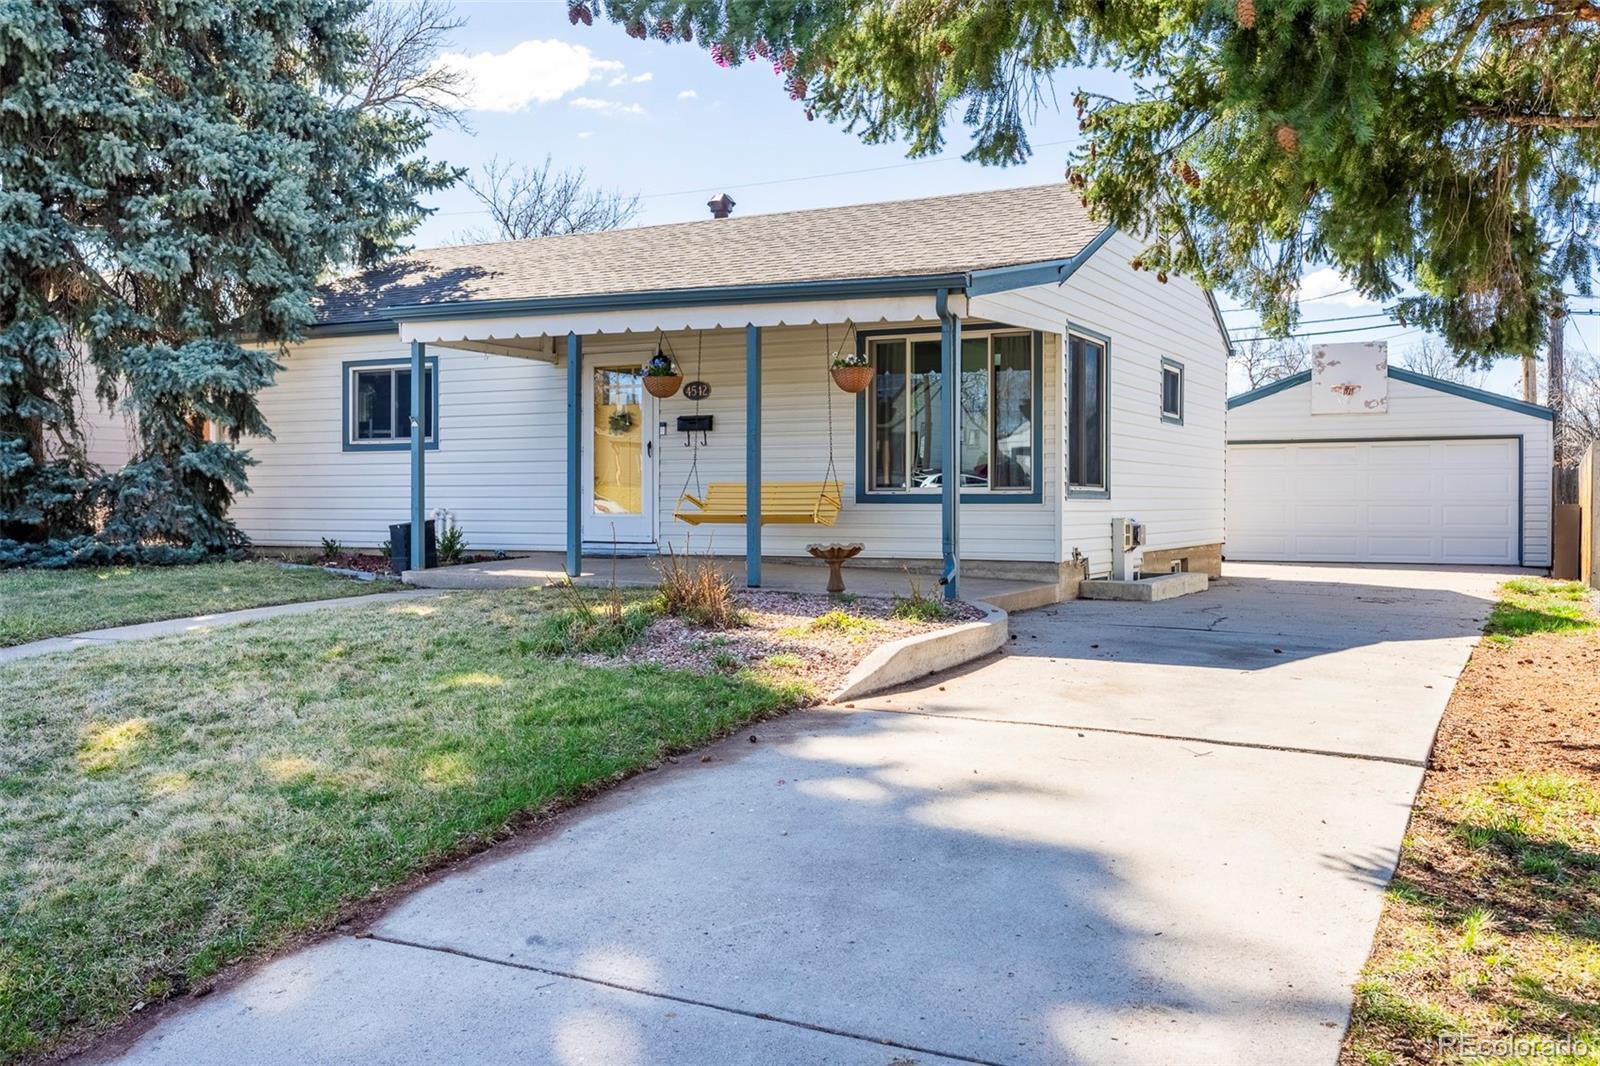 4542 e utah place, denver sold home. Closed on 2024-05-06 for $576,000.